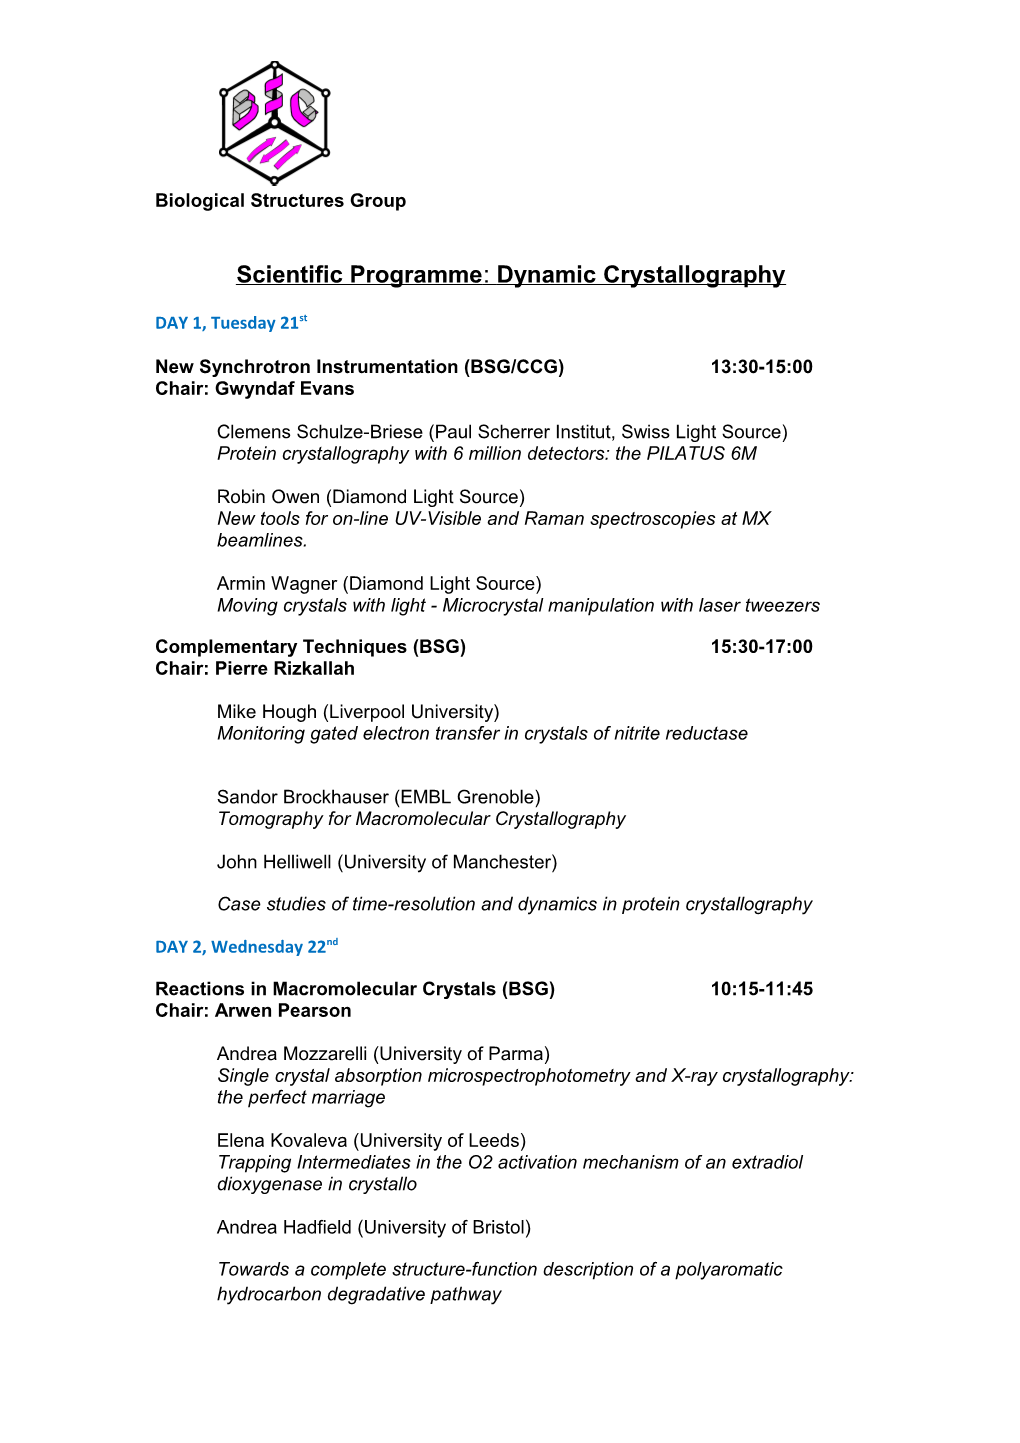 Scientific Programme: Dynamic Crystallography